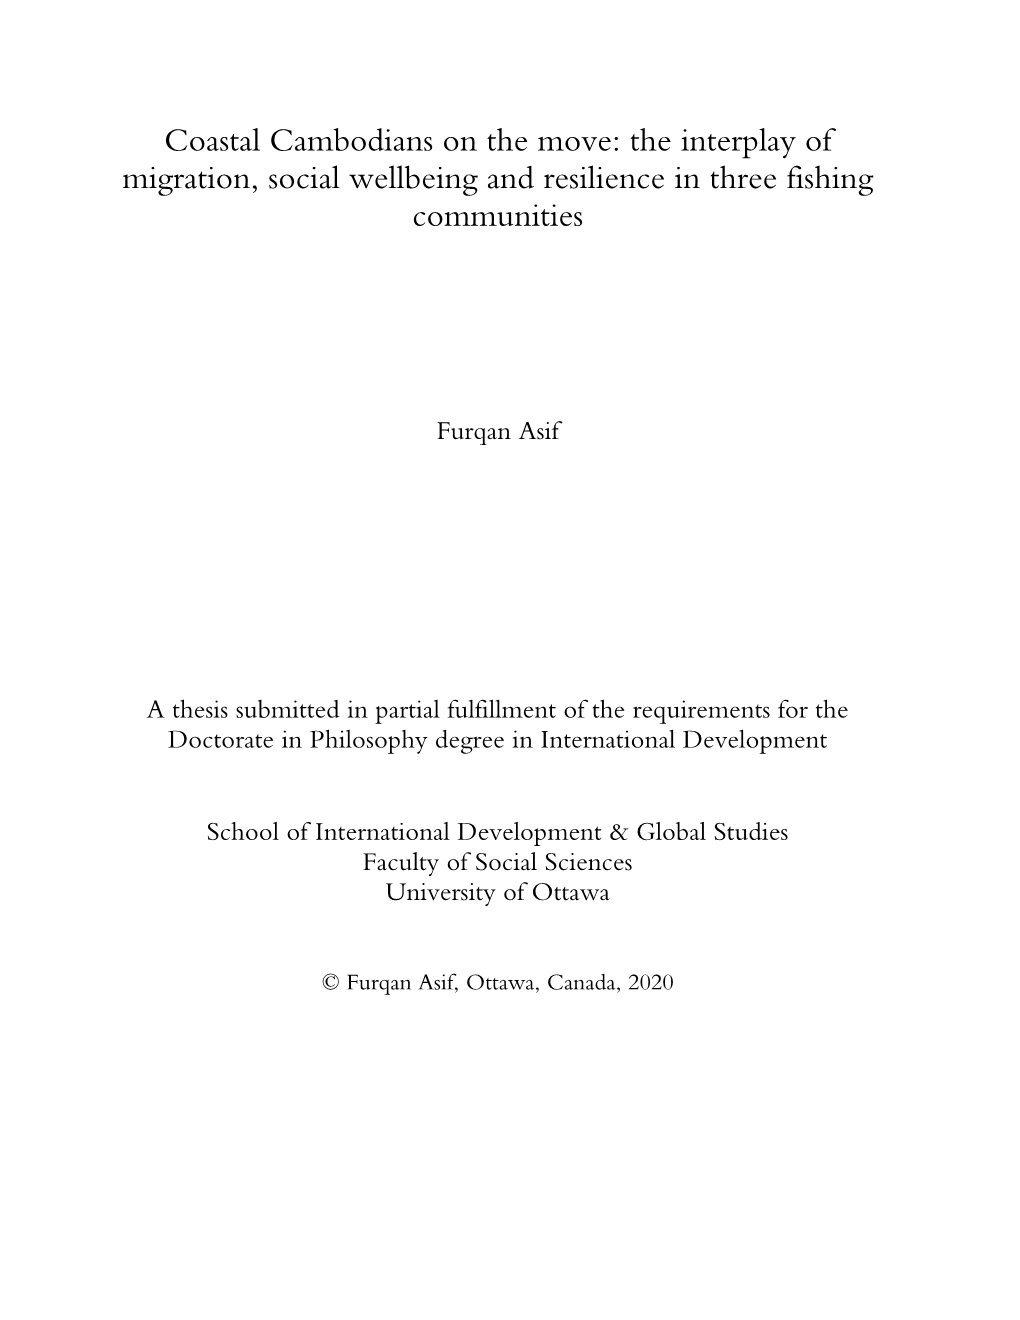 Coastal Cambodians on the Move: the Interplay of Migration, Social Wellbeing and Resilience in Three Fishing Communities